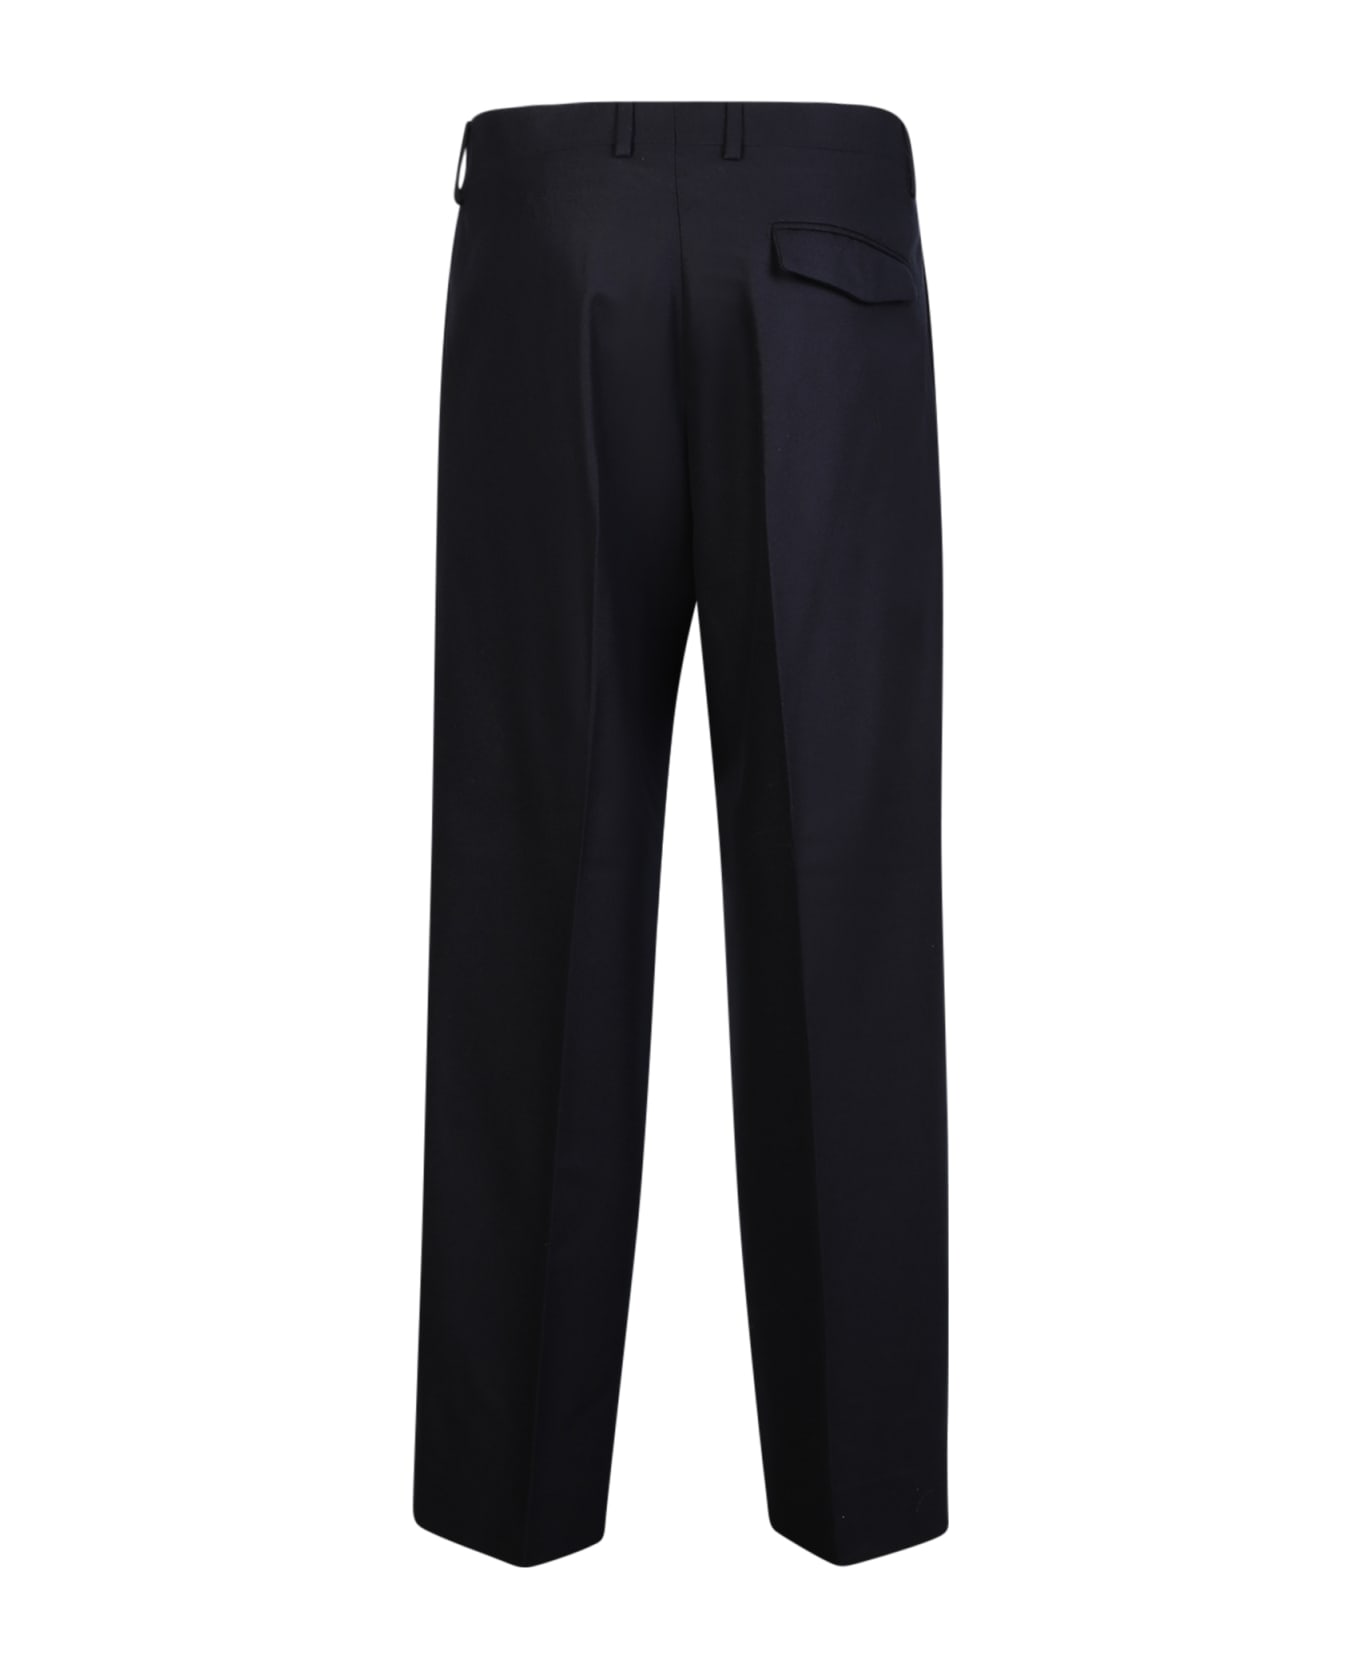 costumein Vincent 1 Pince Trousers In Black - Black